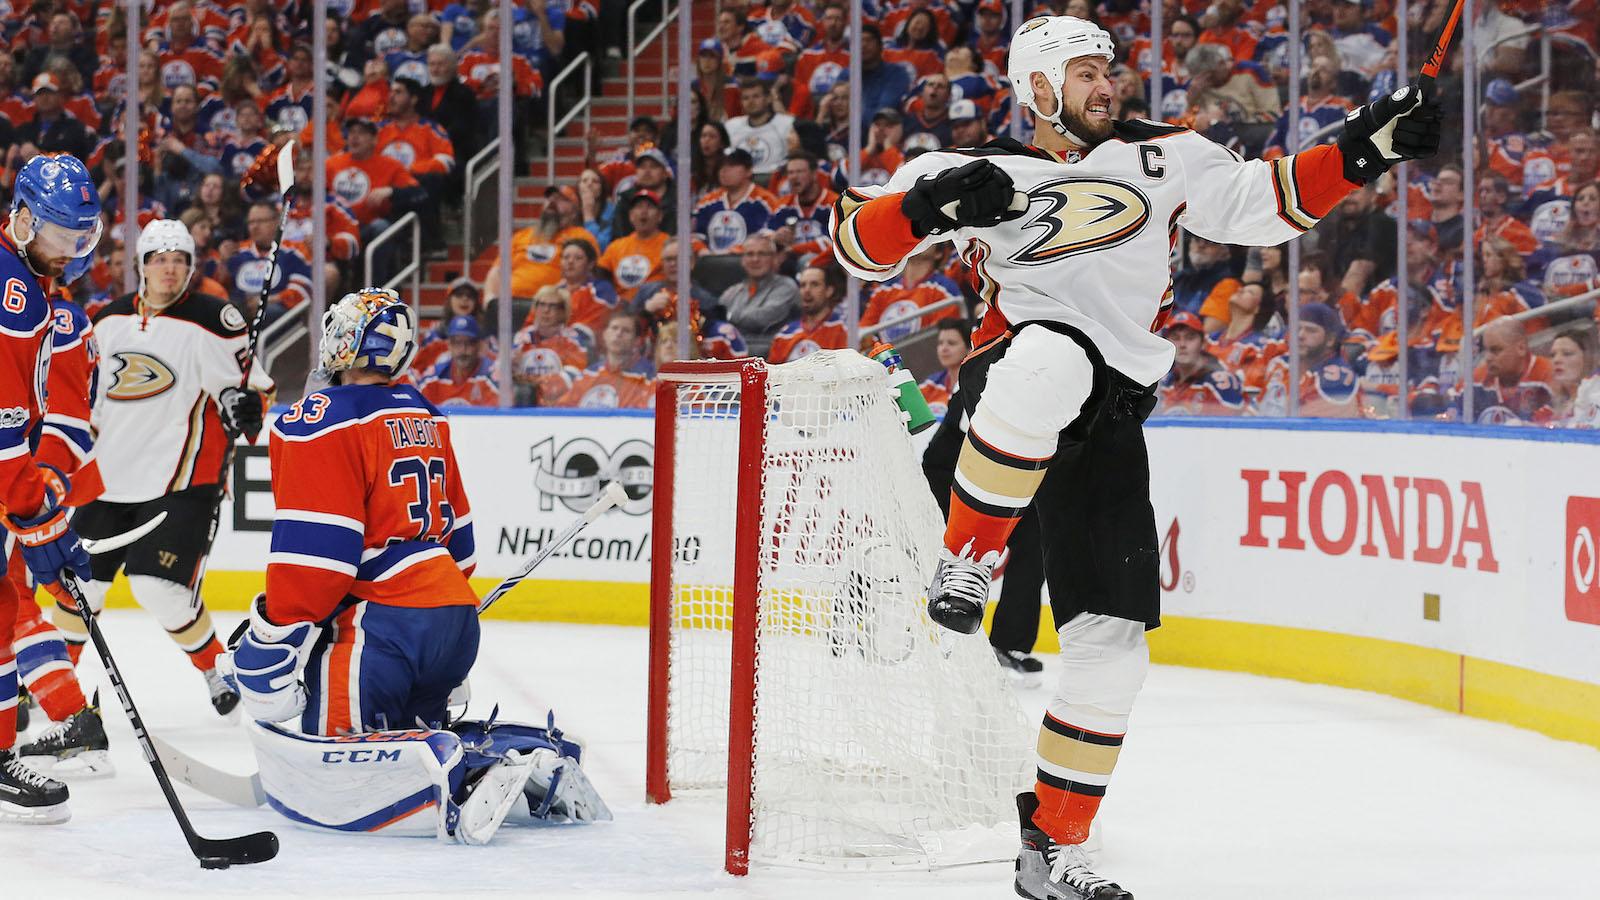 Ryan Getzlaf was spectacular for the Ducks in Game 4 even with some